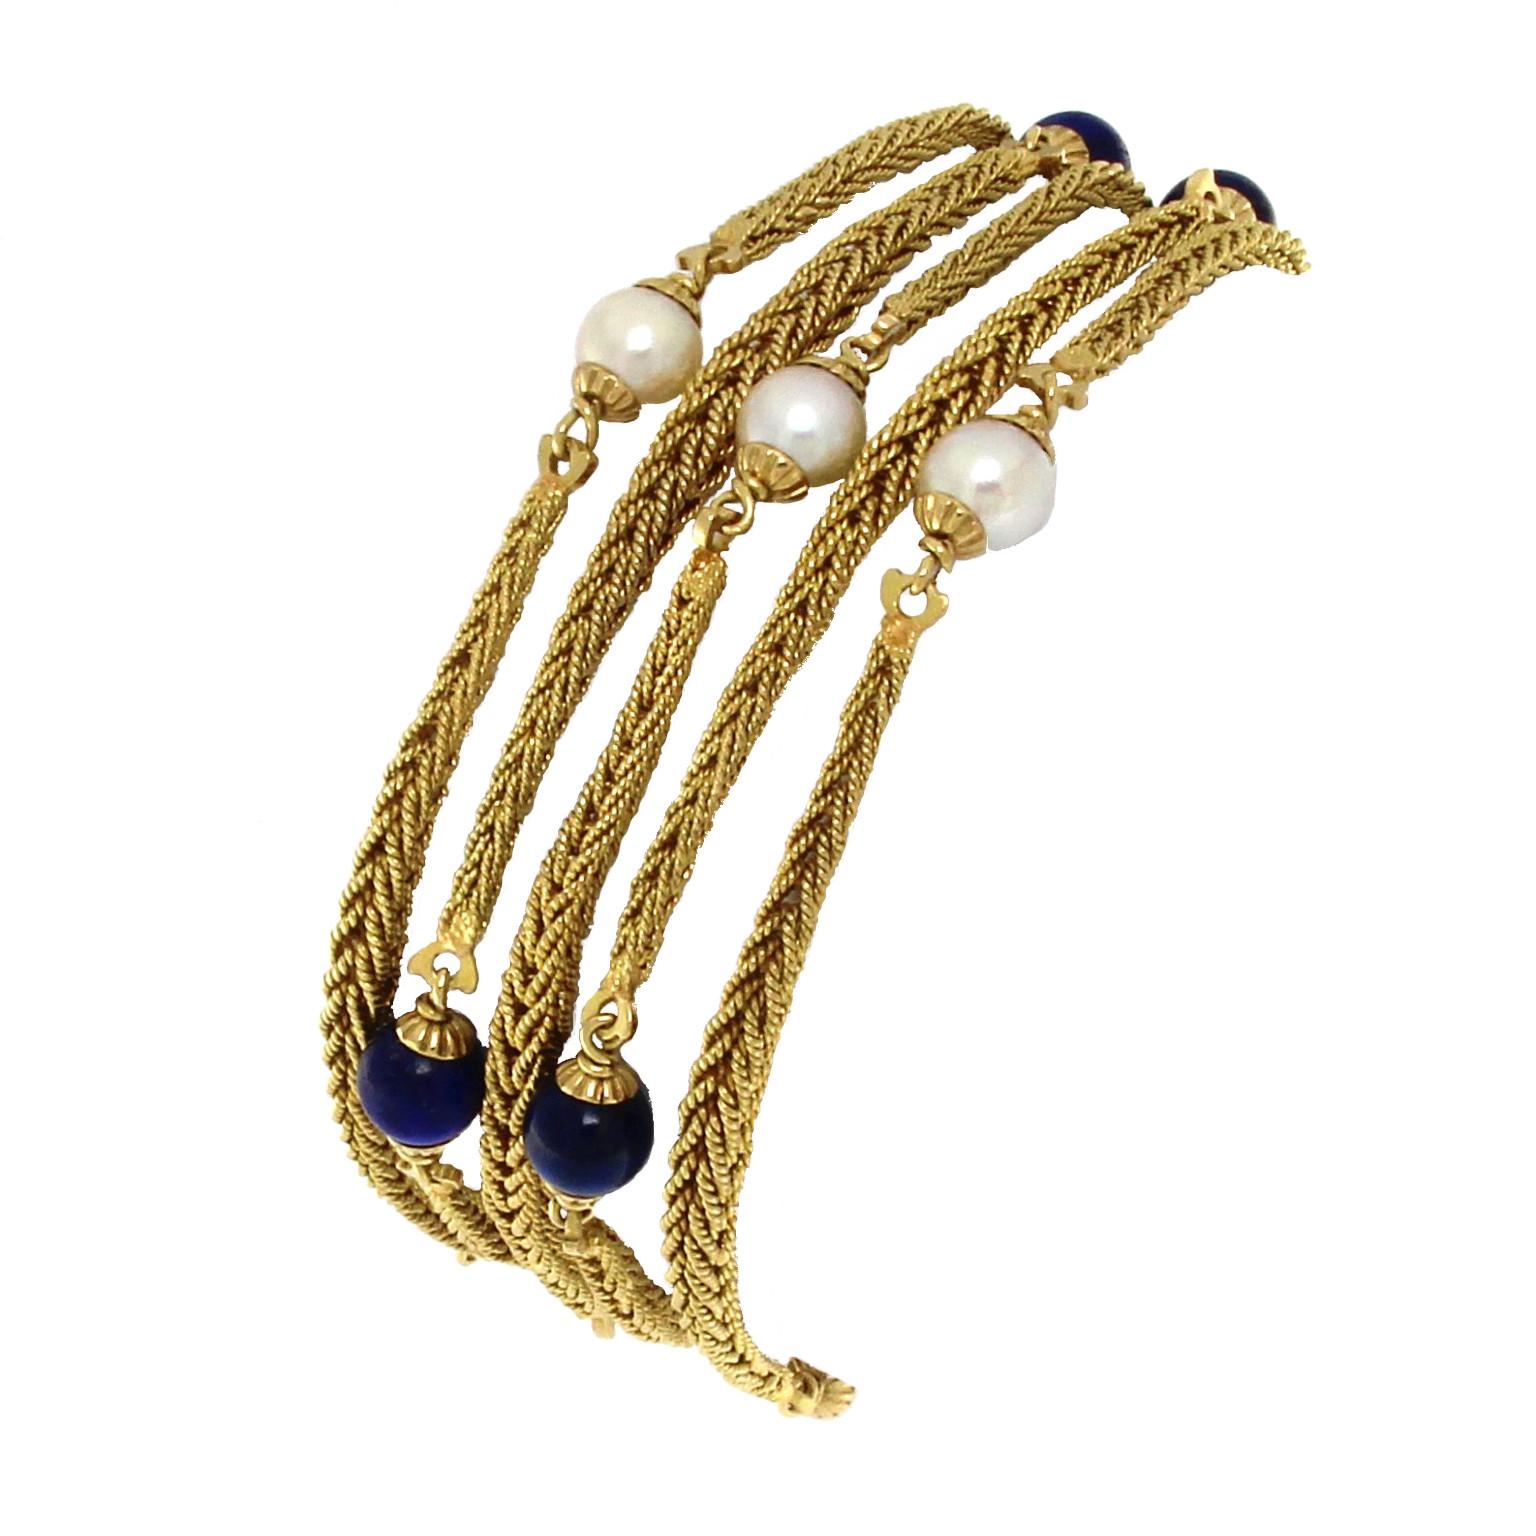 18k yellow multichain bracelet with pearls and lapis

Total weight of  gold 18 kt gr 41.00
6 pearls and 6 lapis beads
STAMP 750

